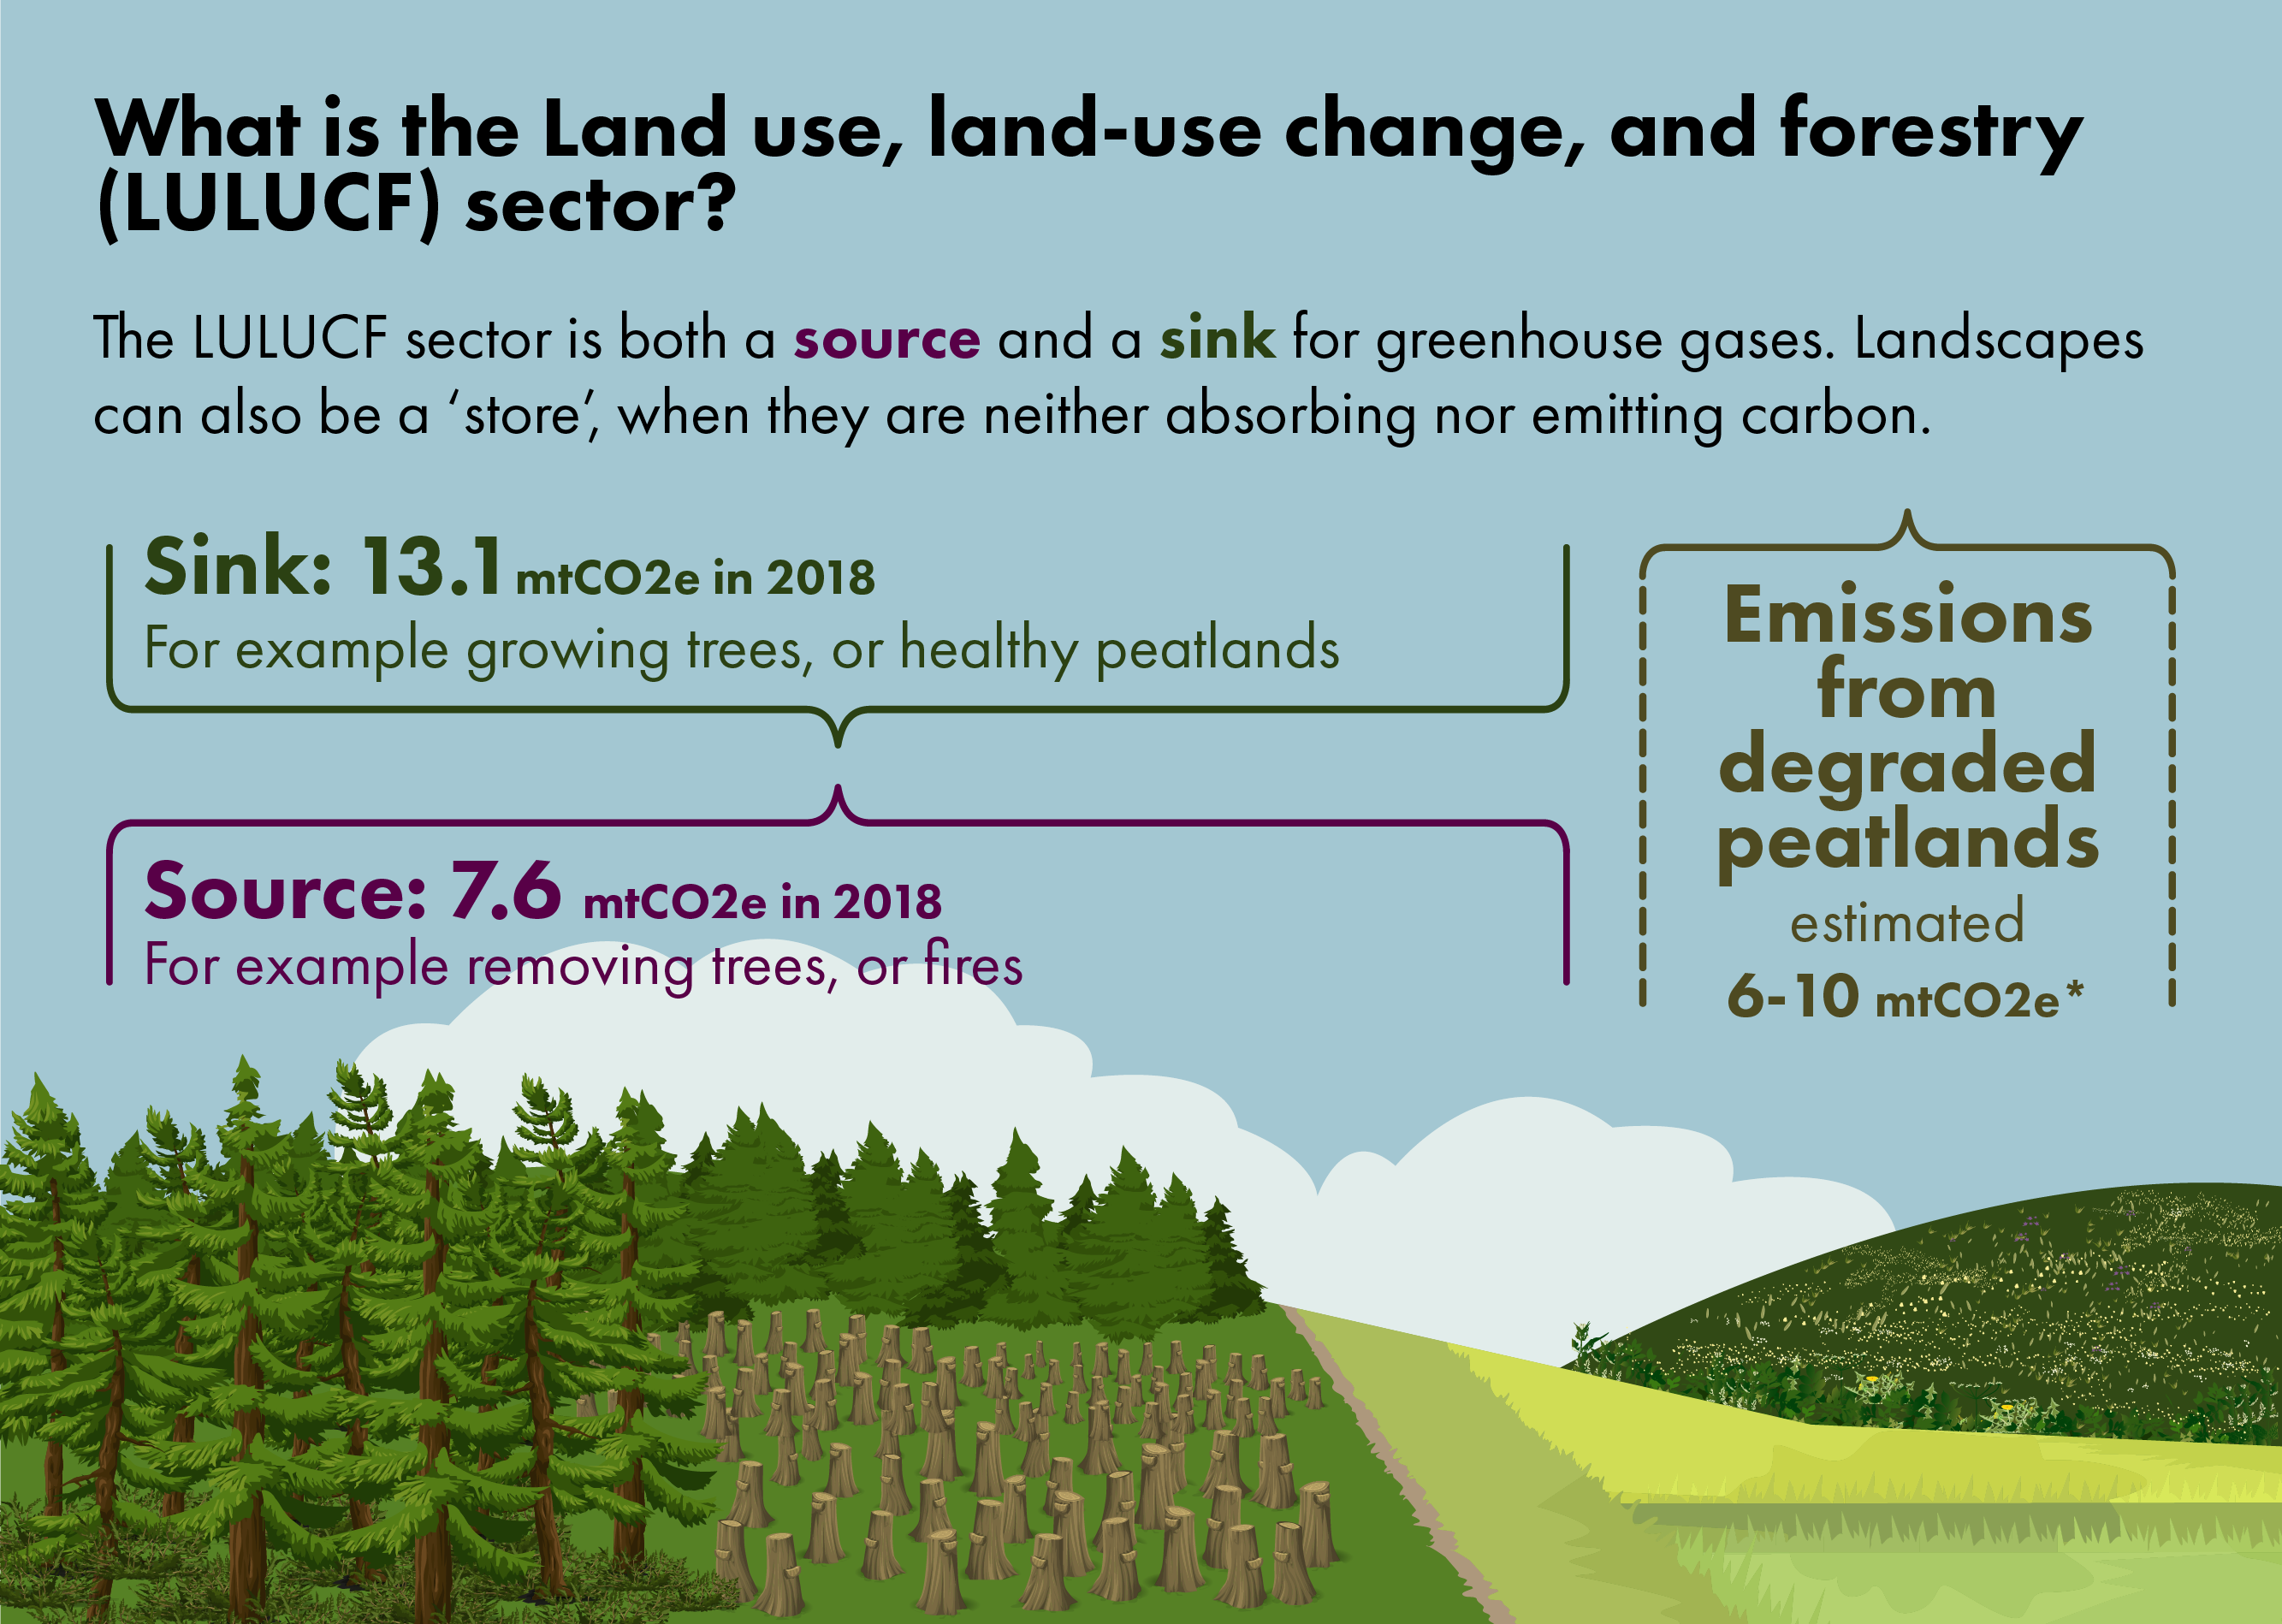 The land use, land use change and forestry sector can be both a sink and a source of greenhouse gas emissions. It can also be a store, when it is neither emitting or sequestering carbon. Activities such as growing trees, or healthy peatlands sequester carbon, while removing trees or fires emit carbon from land. In 2018, the land use, land use change and forestry sector emitted 7.6 million tonnes of carbon dioxide equivalent, but sequestered 13.1 million tonnes. To add to this, there are 6 to 10 million tonnes that are still to be accounted for, these are for emissions from degraded peatlands.